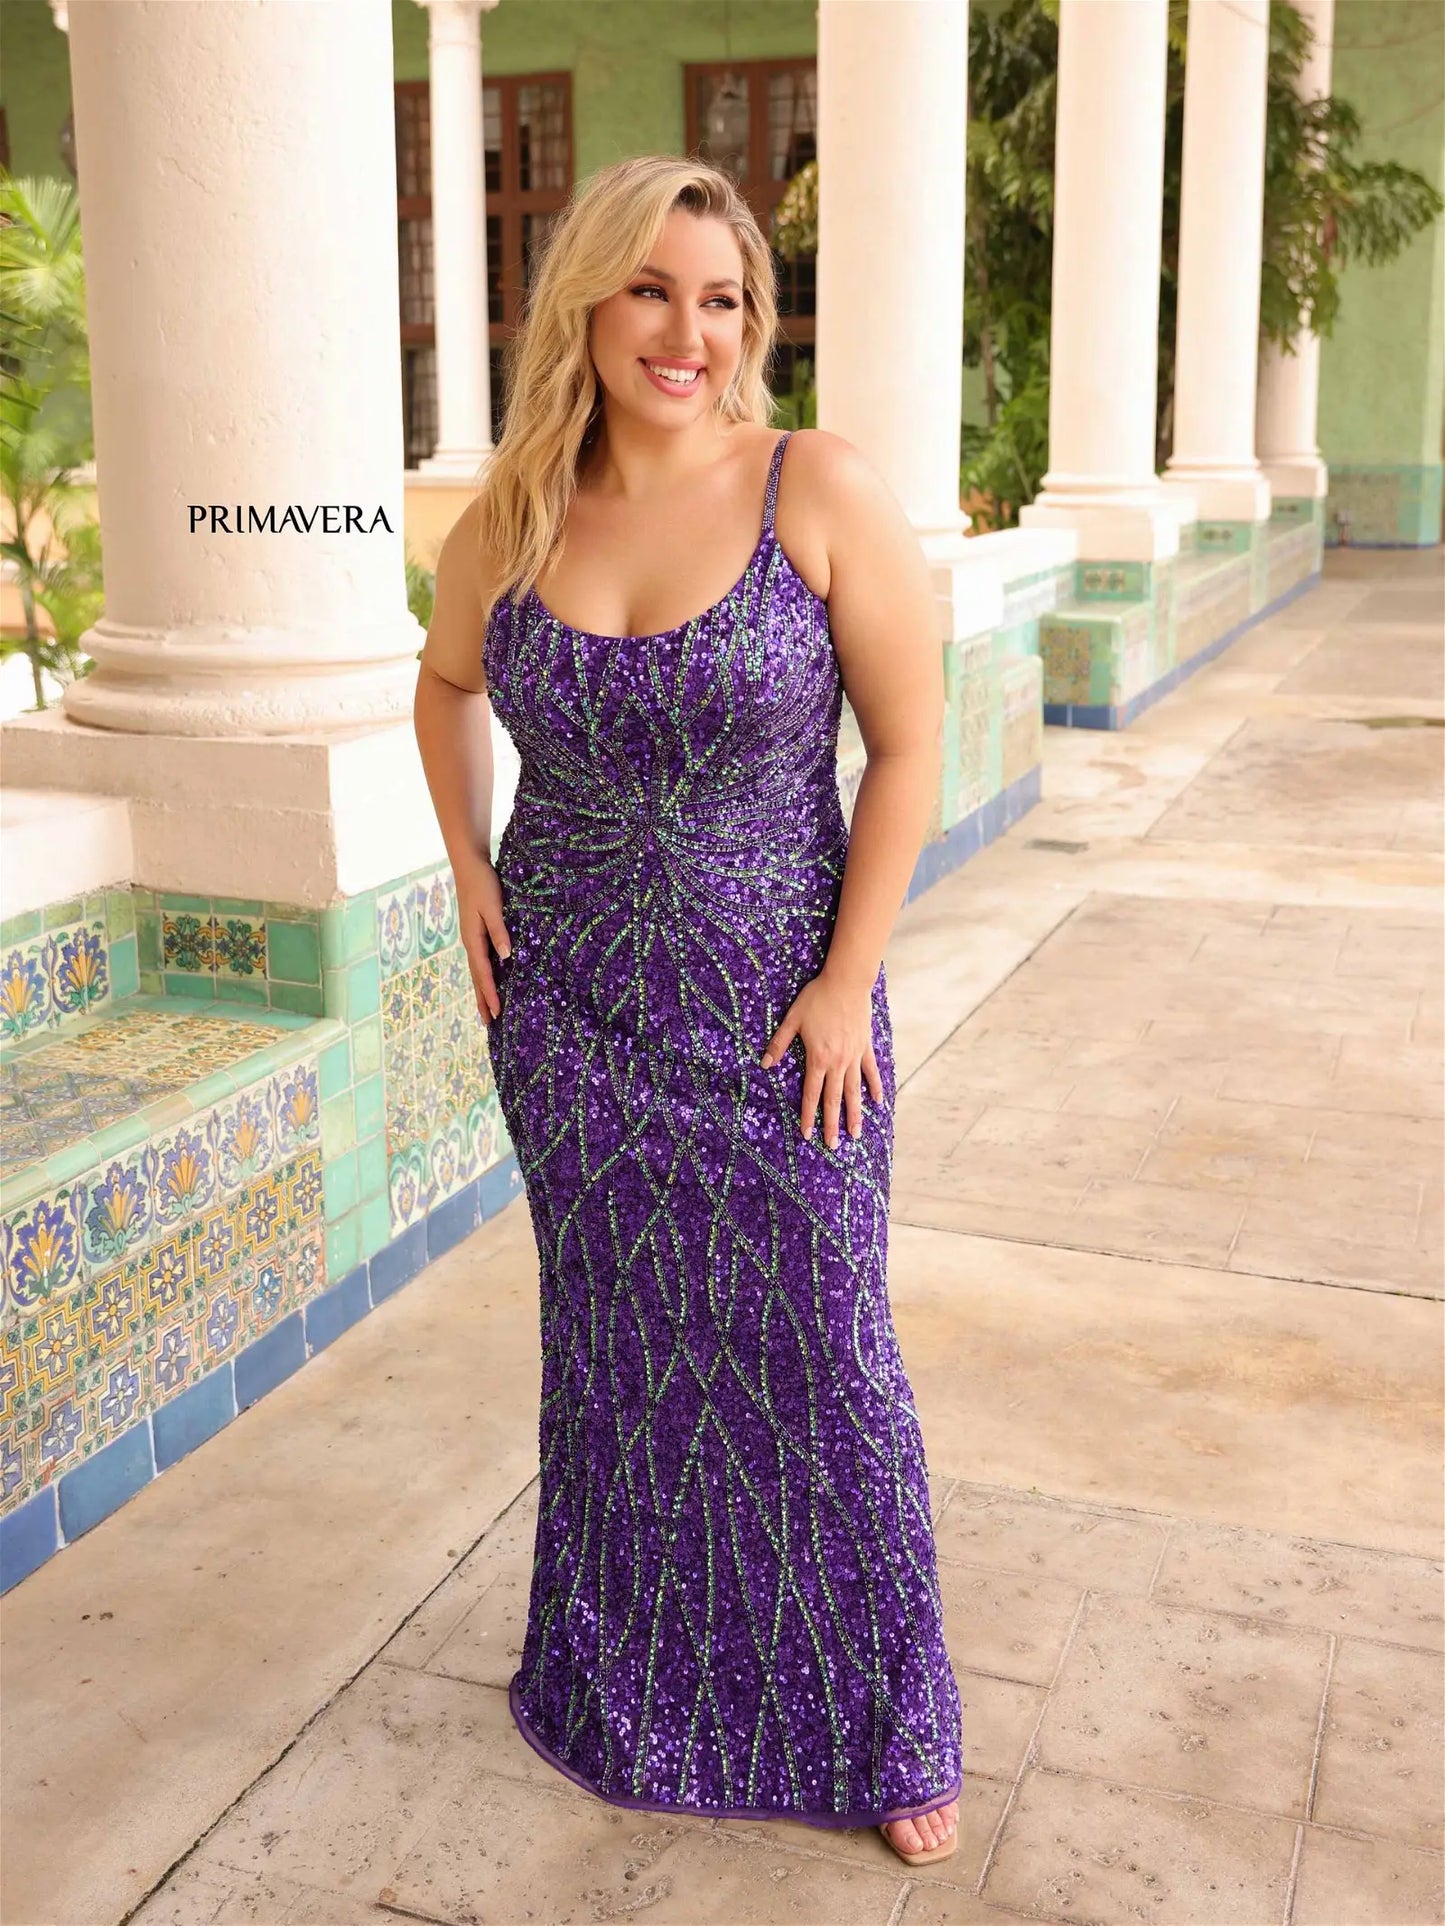 Make a statement in Primavera Couture 14045 Plus Size Sequin Prom Dress. Sequin detailing and corset back create a stunning silhouette and ensures a flattering fit. Scoop neckline and no-slit skirt make this dress the perfect choice for your special occasion.  Sizes: 14W-24W  Colors: Purple, Fuchsia, Nude/Gold